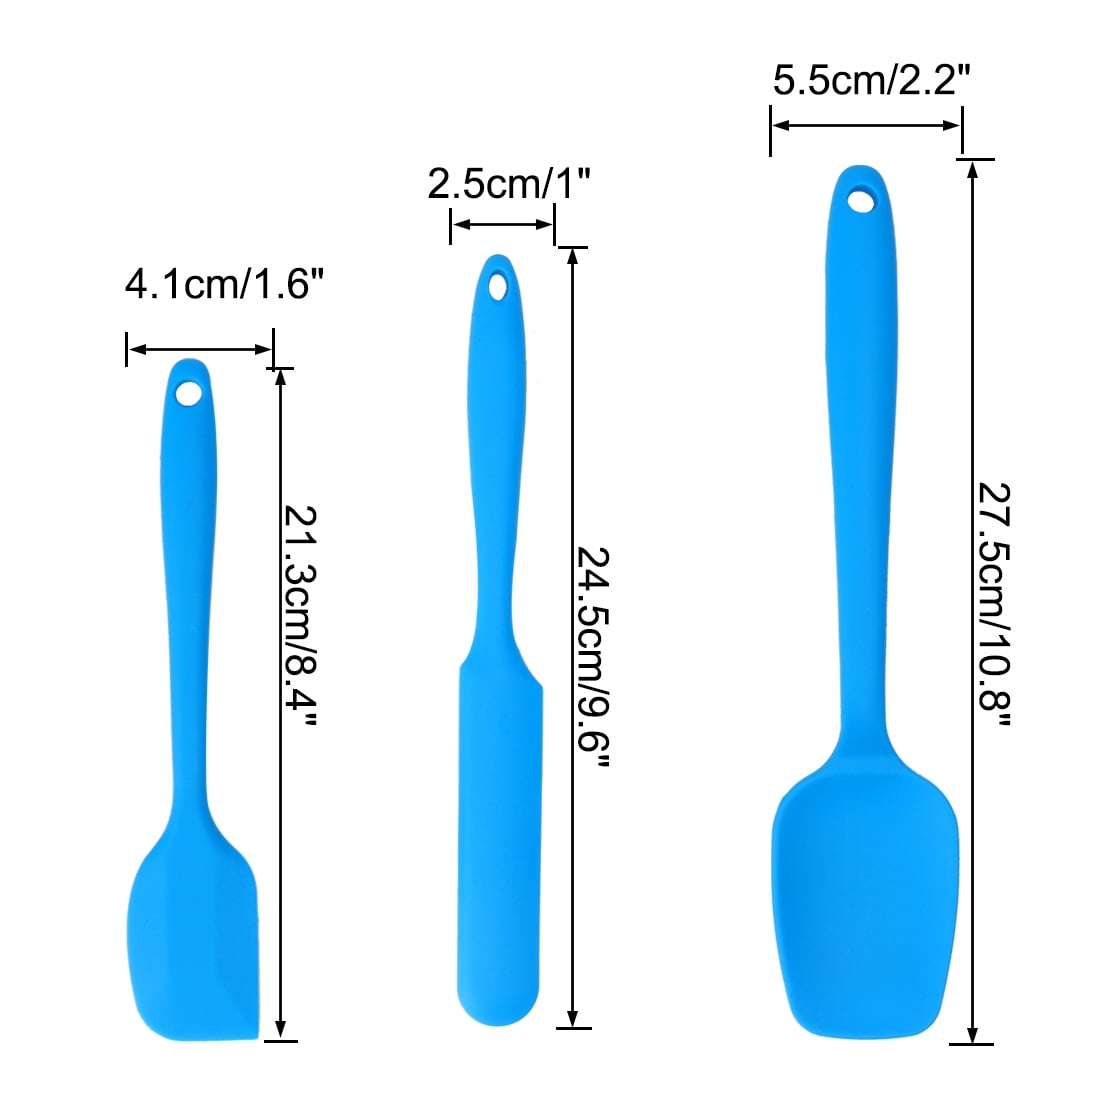 https://ak1.ostkcdn.com/images/products/is/images/direct/def0091e1367e83e9df847d5704dfeda84084b69/3pcs-Silicone-Spatula-Set-Heat-Resistant-Non-scratch-Kitchen-Turner-Non-Stick-Spatula-for-Cooking-Baking-and-Mixing-Blue.jpg